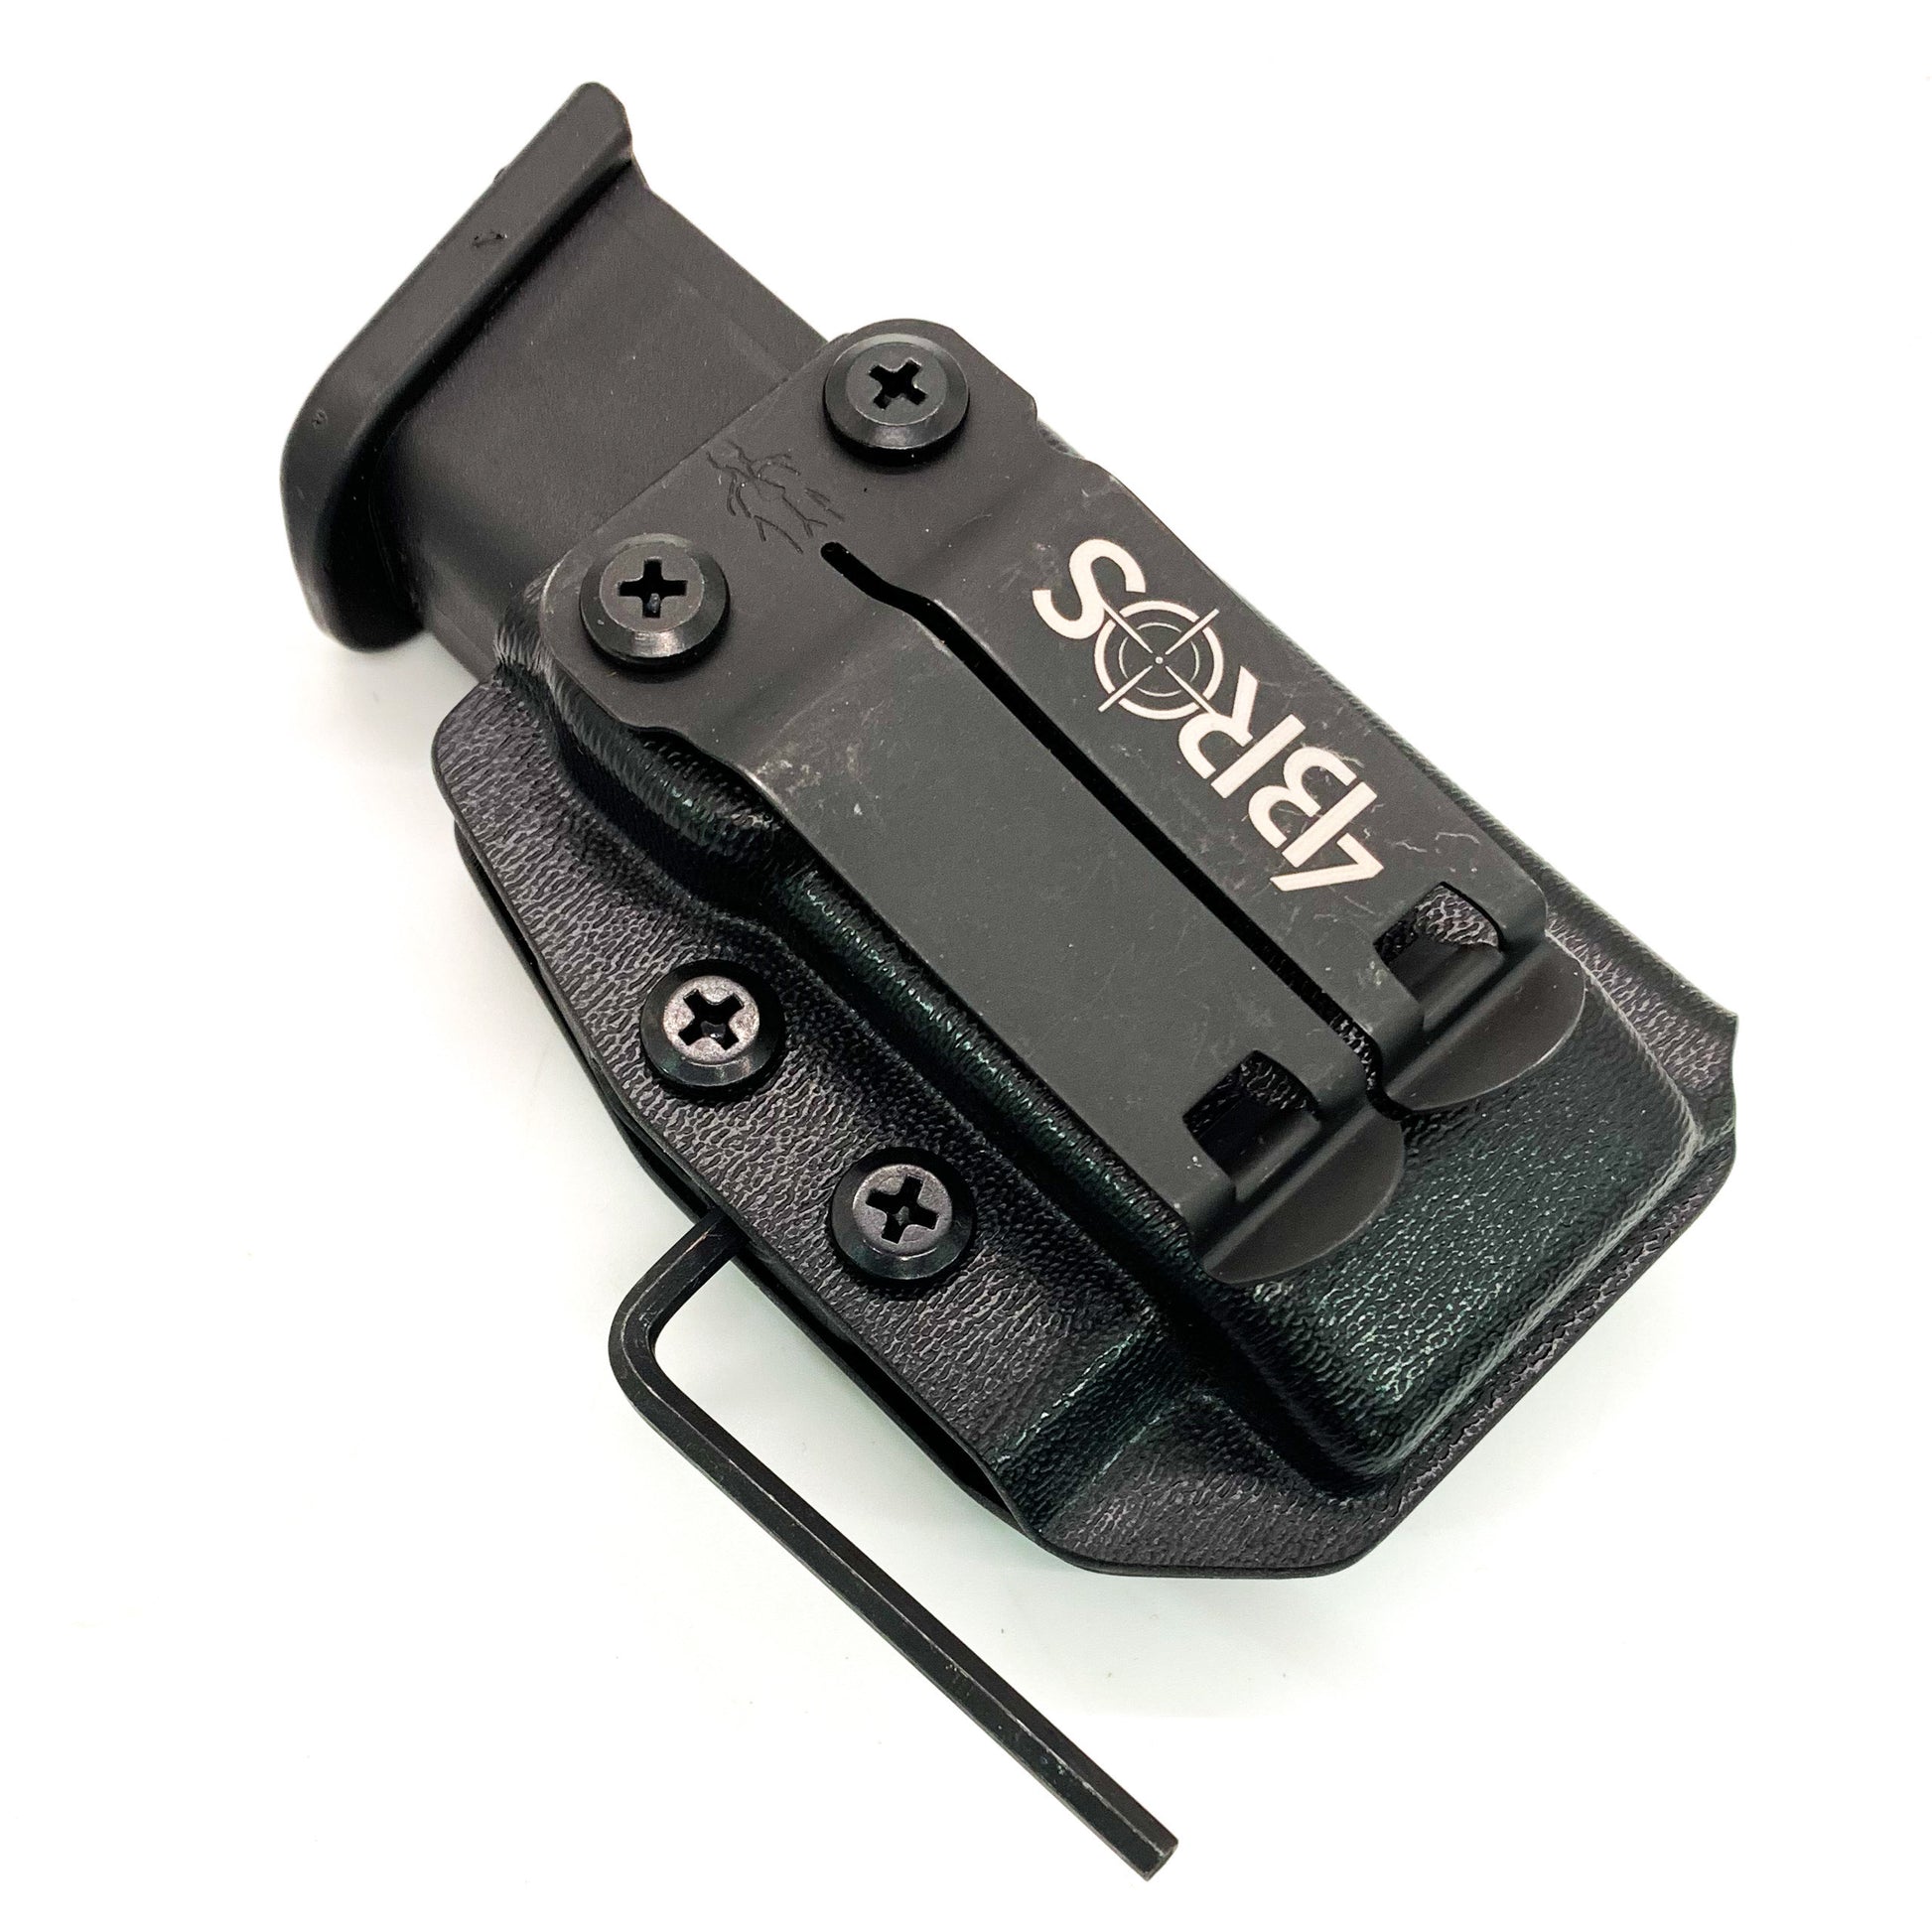 For the best, Inside Waistband IWB AIWB Glock 17, 17L, 19, 22, 23, 26, 27, 34, 35, 45, 31, 32, 33 magazine carrier, holster, & pouch for the Sig P320, P365, P365XL, .357 Sig, 9mm & 40 Walther, Smith & Wesson, Arex, H&K, and 509, 509T, LS EDGE FN magazines, shop Four Brothers Holsters. 4BROS, Made in the USA